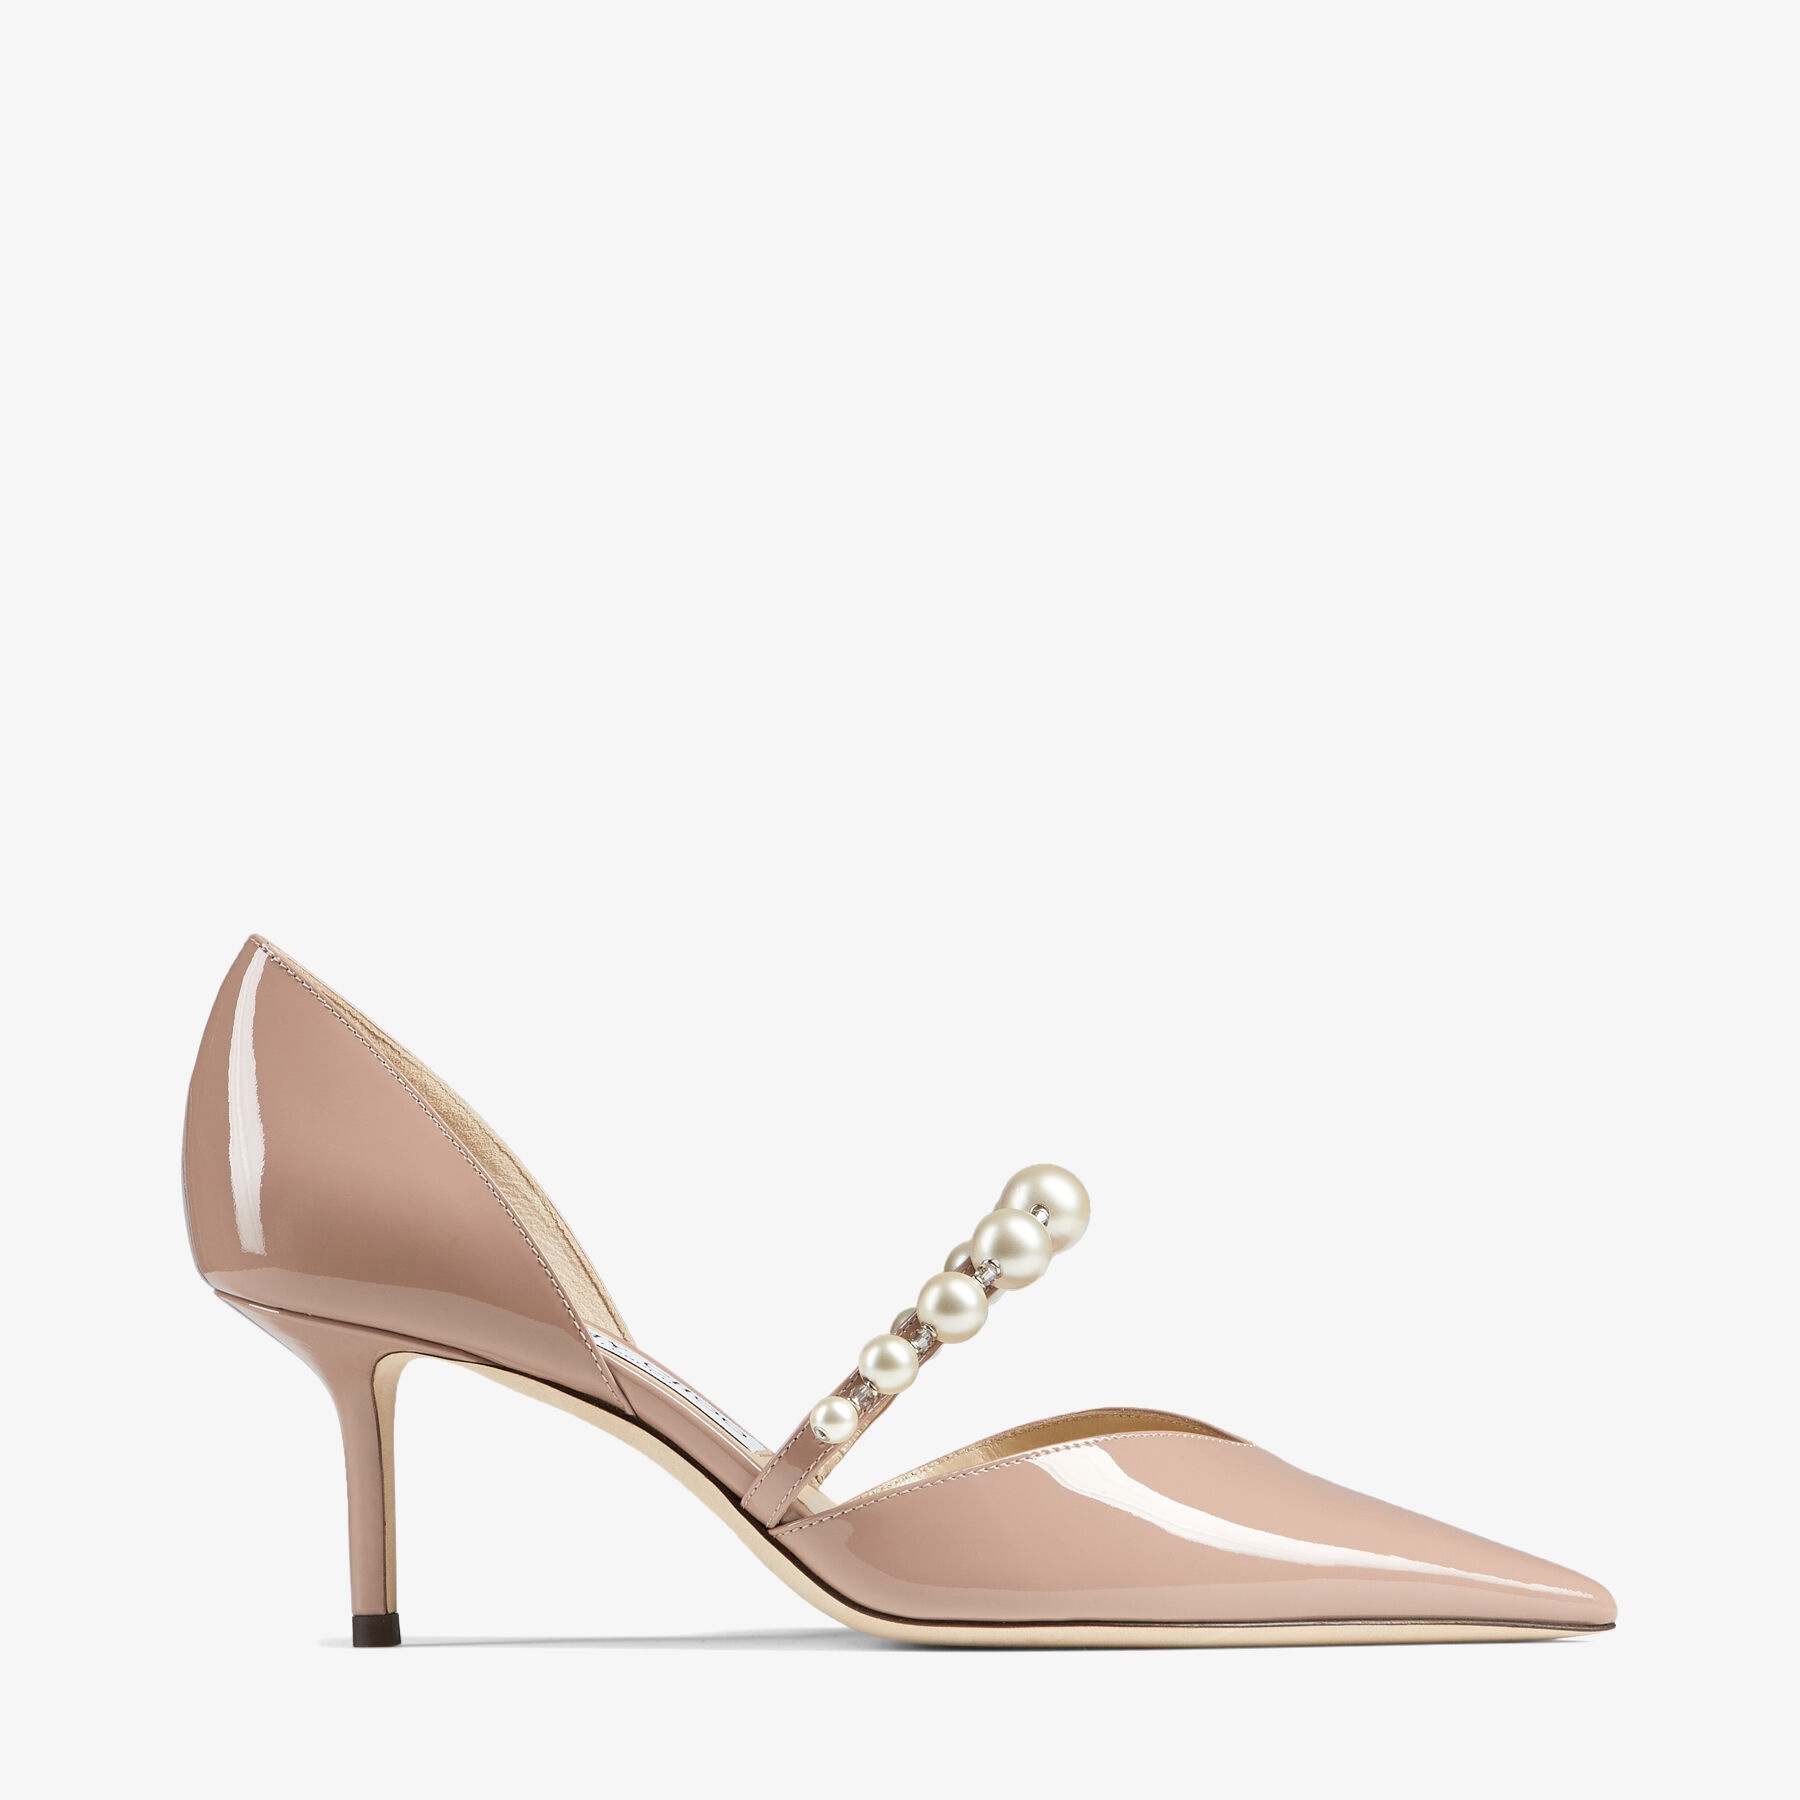 Aurelie 65
Ballet Pink Patent Leather Pointed Pumps with Pearl Embellishment - 1